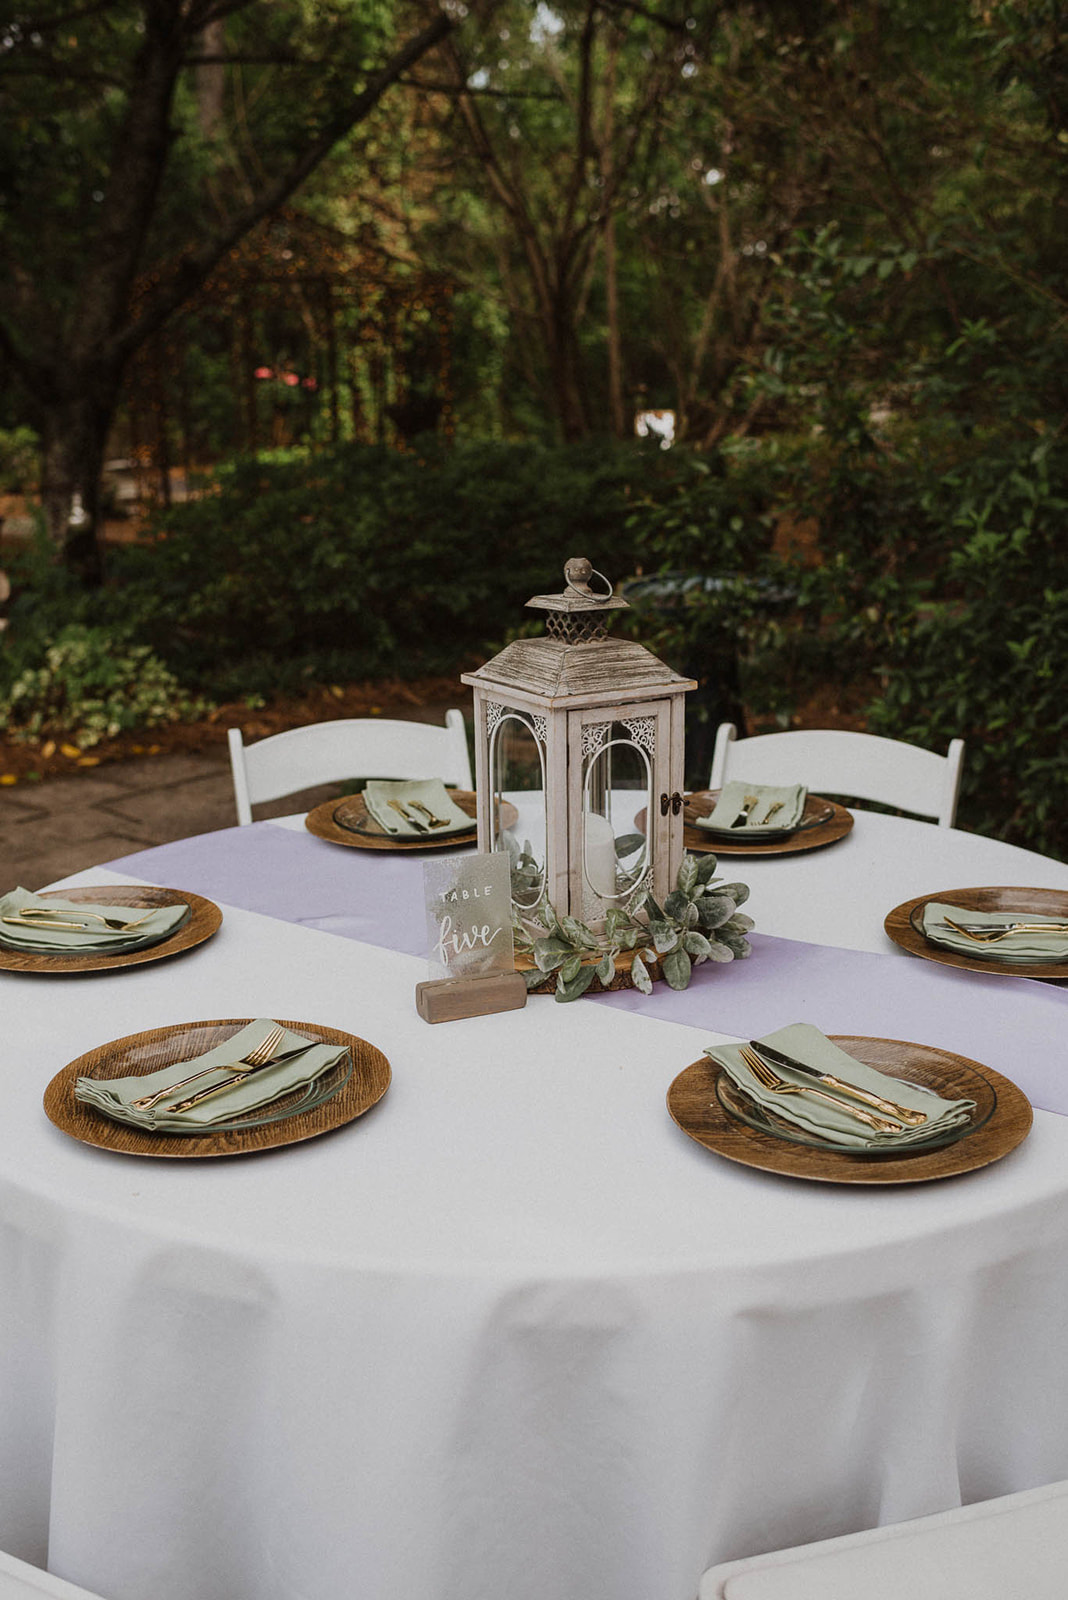 Rustic spring tablescape with wood chargers and lantern plus sage green and lilac linens